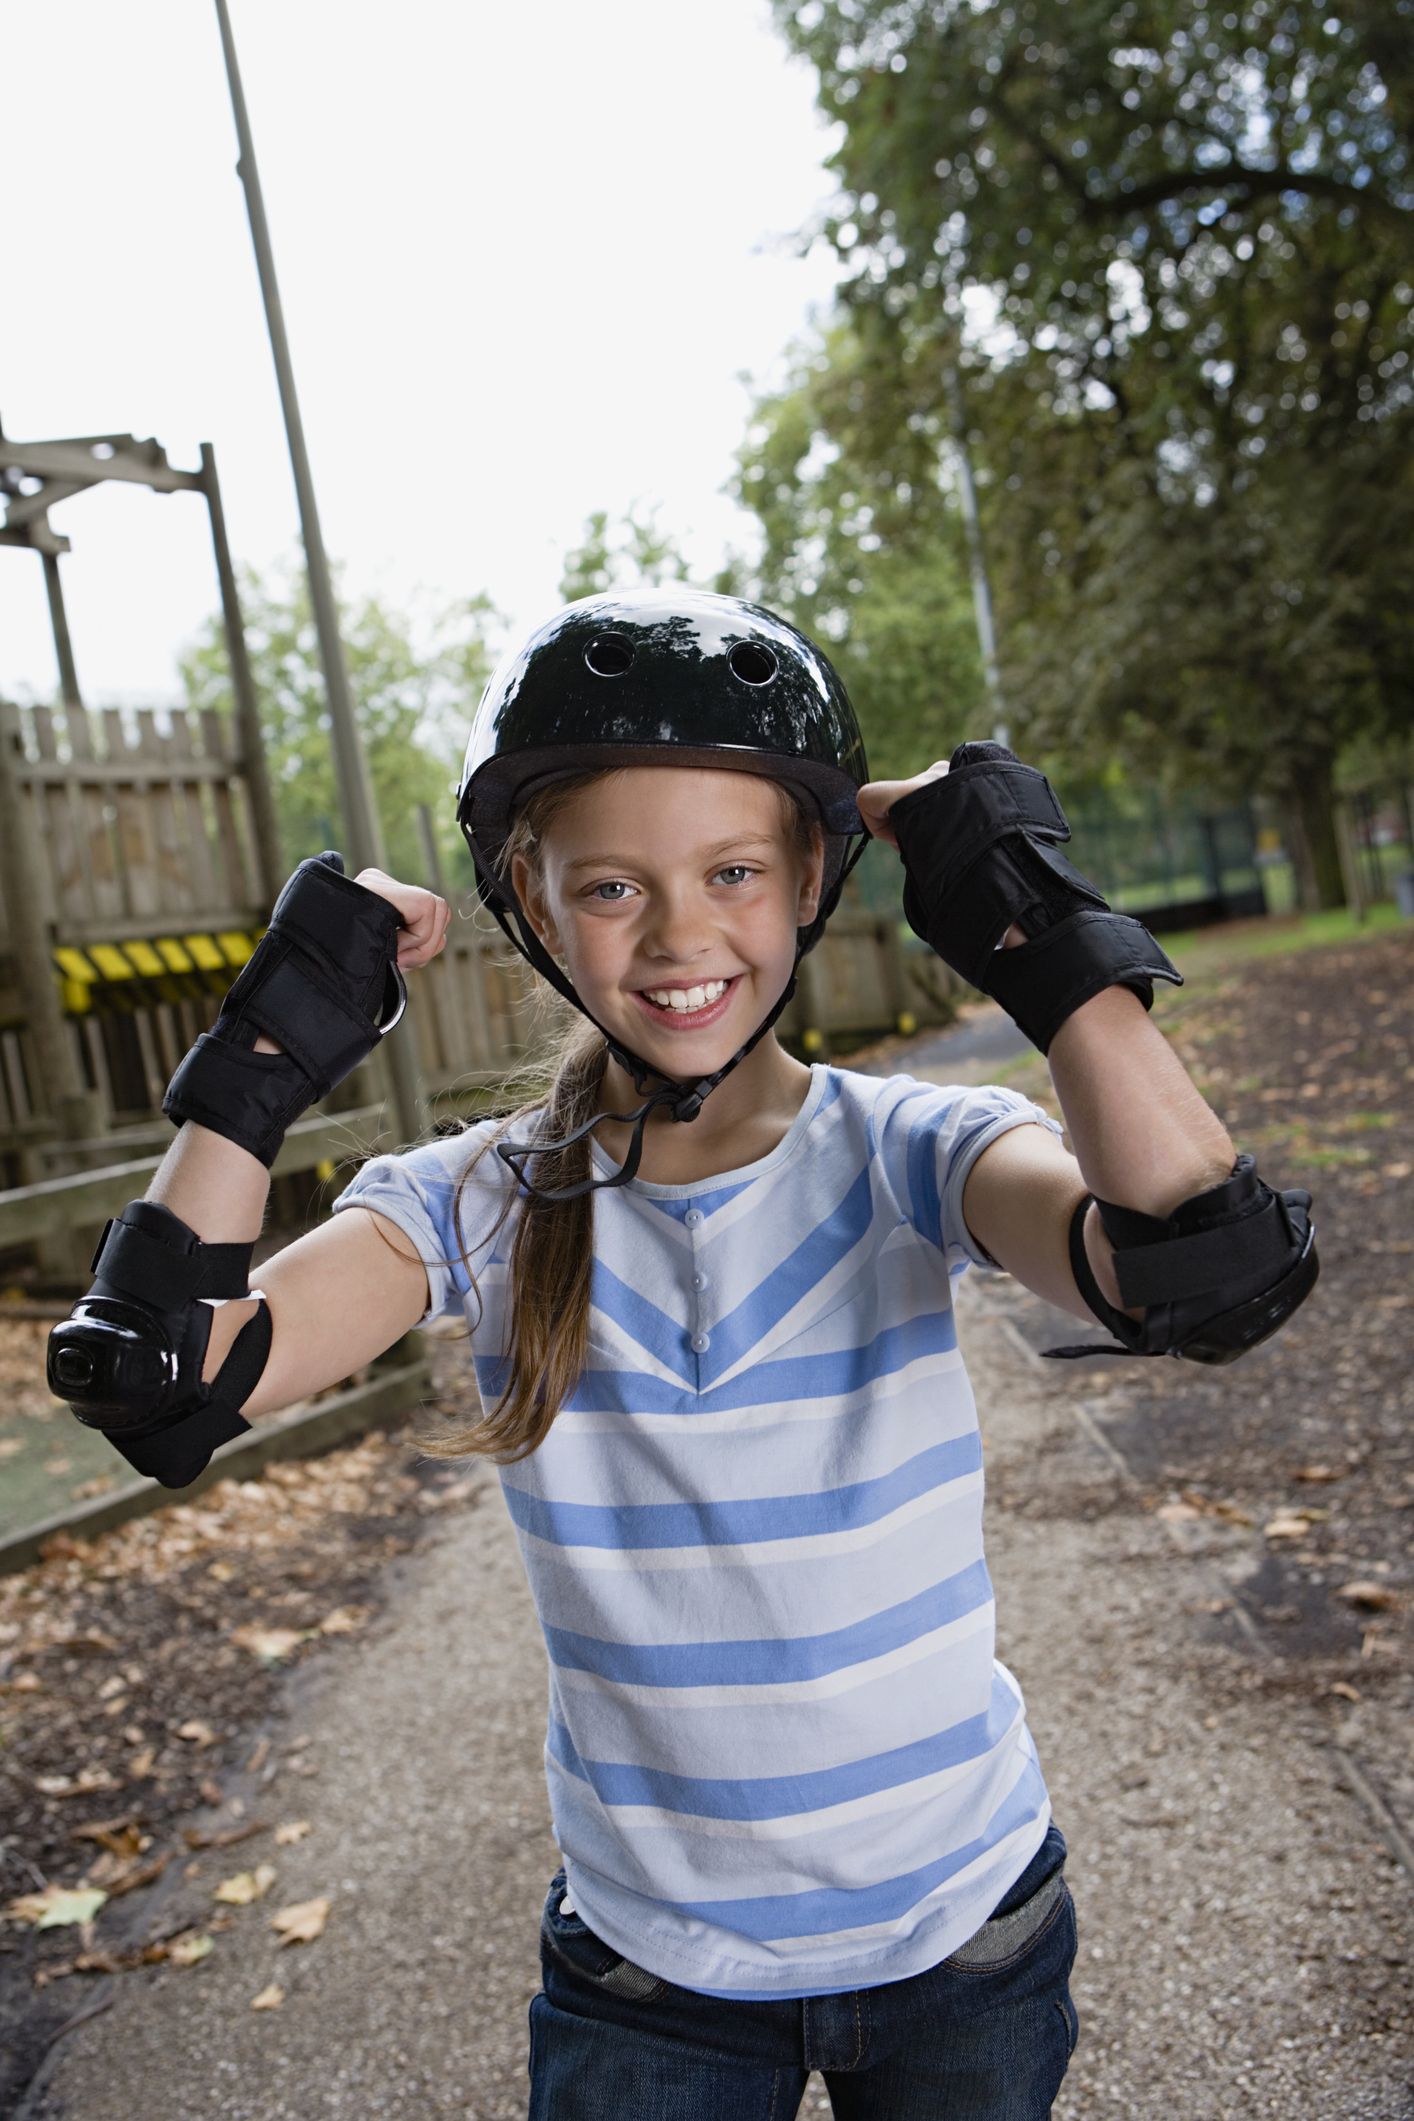 Skateboarder with protective gear